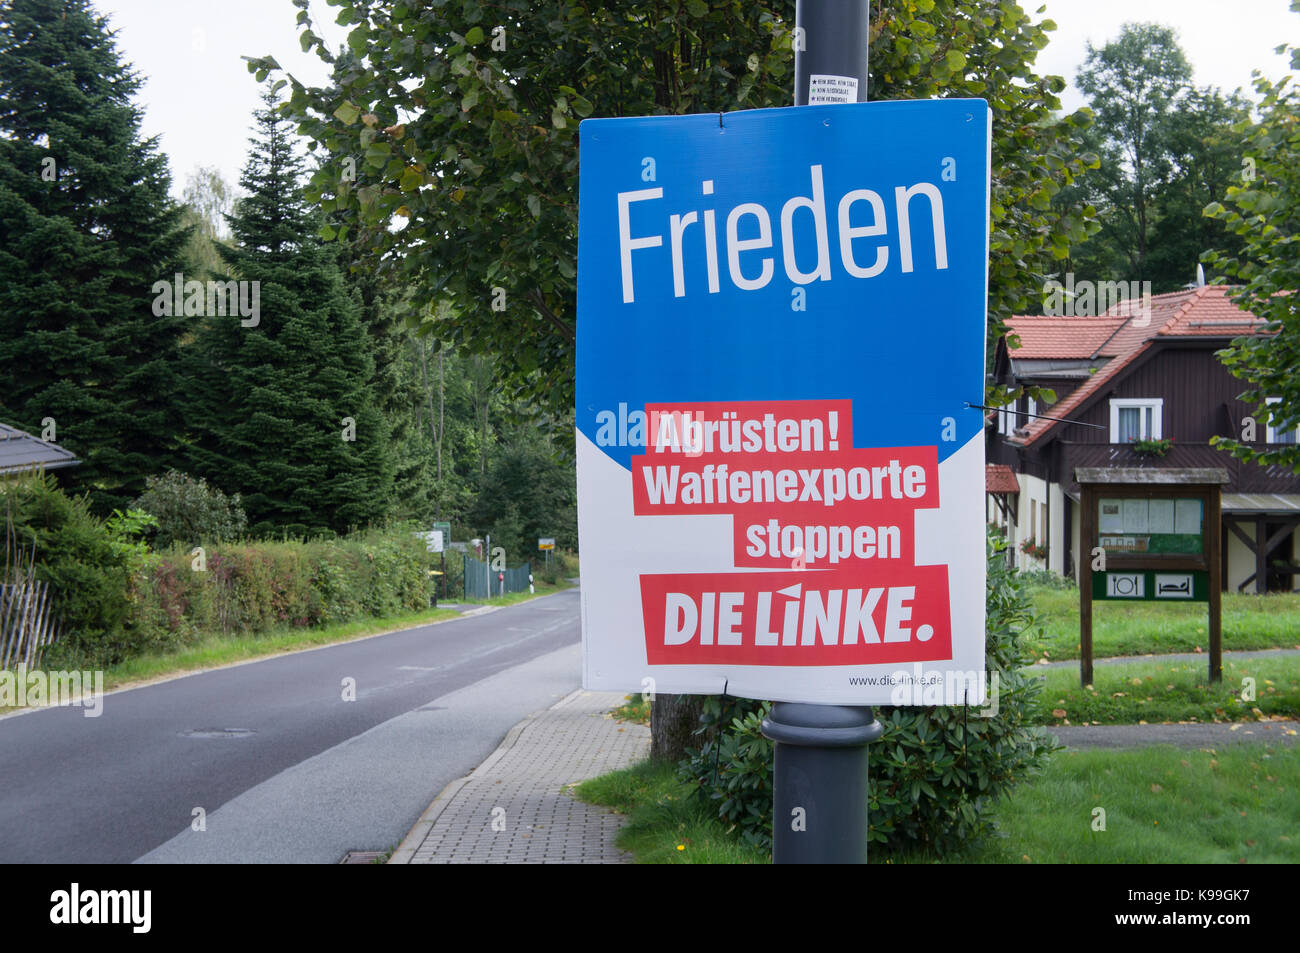 Die Linke pre-election campaign poster Stock Photo